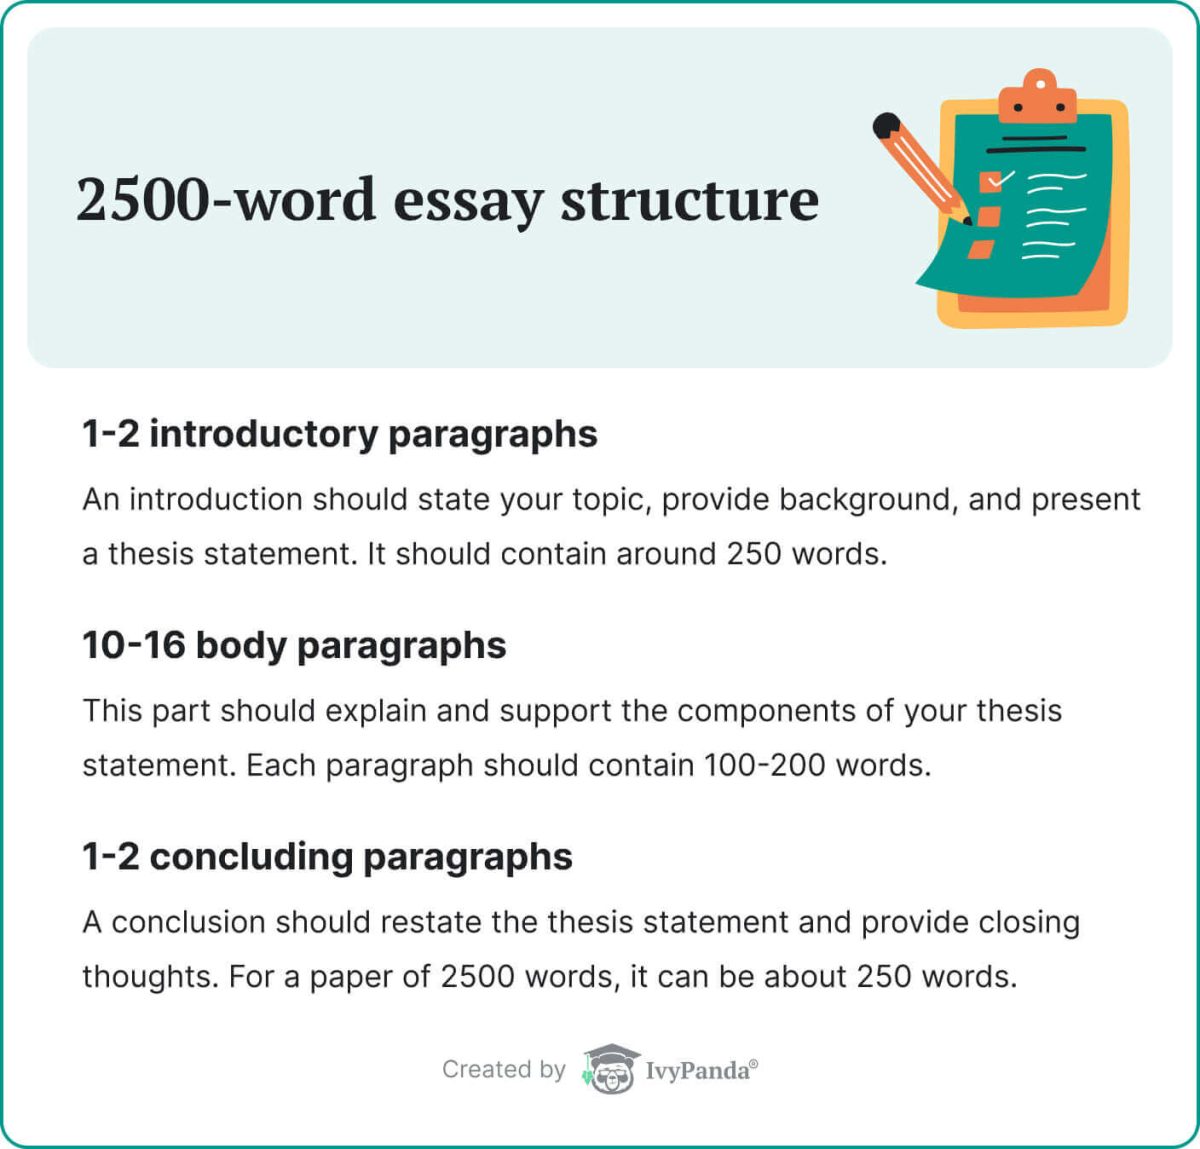 This image shows the 2500-word essay structure. 